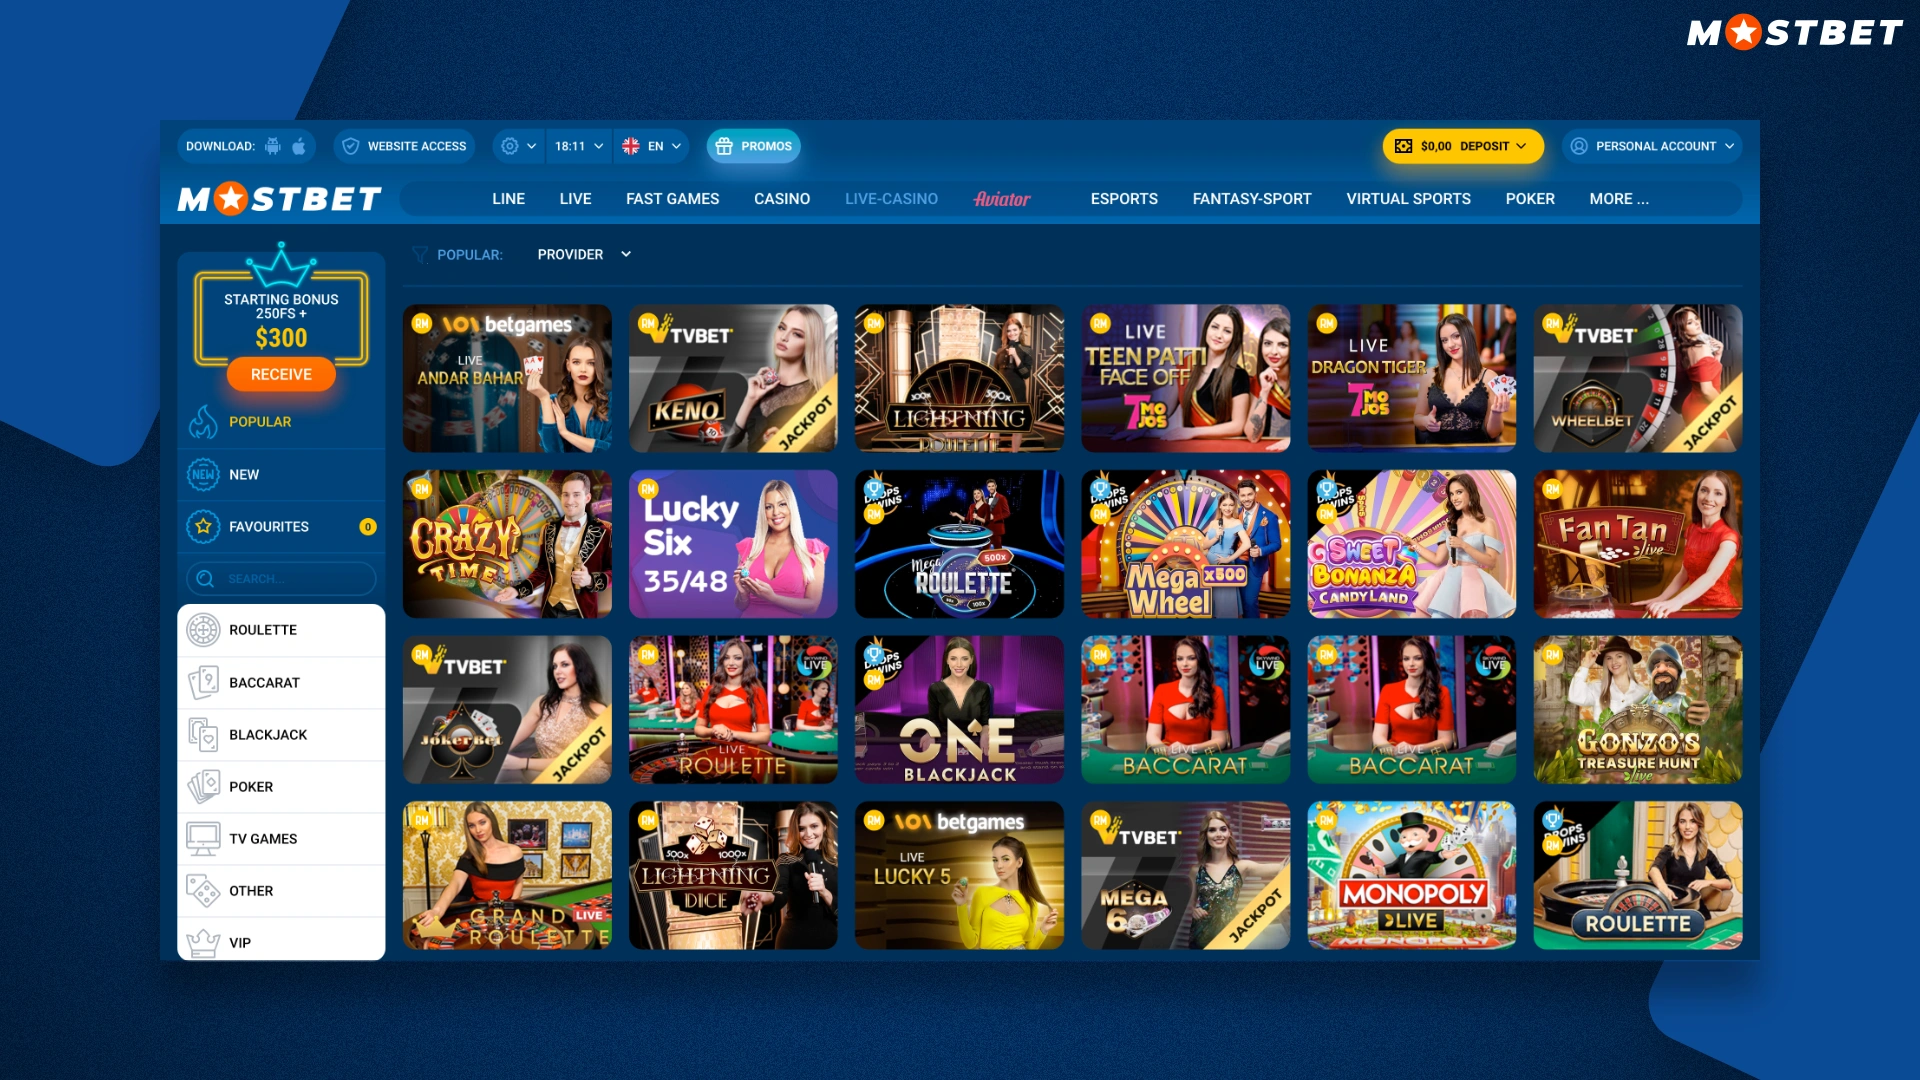 The most popular games at Mostbet Live Casino